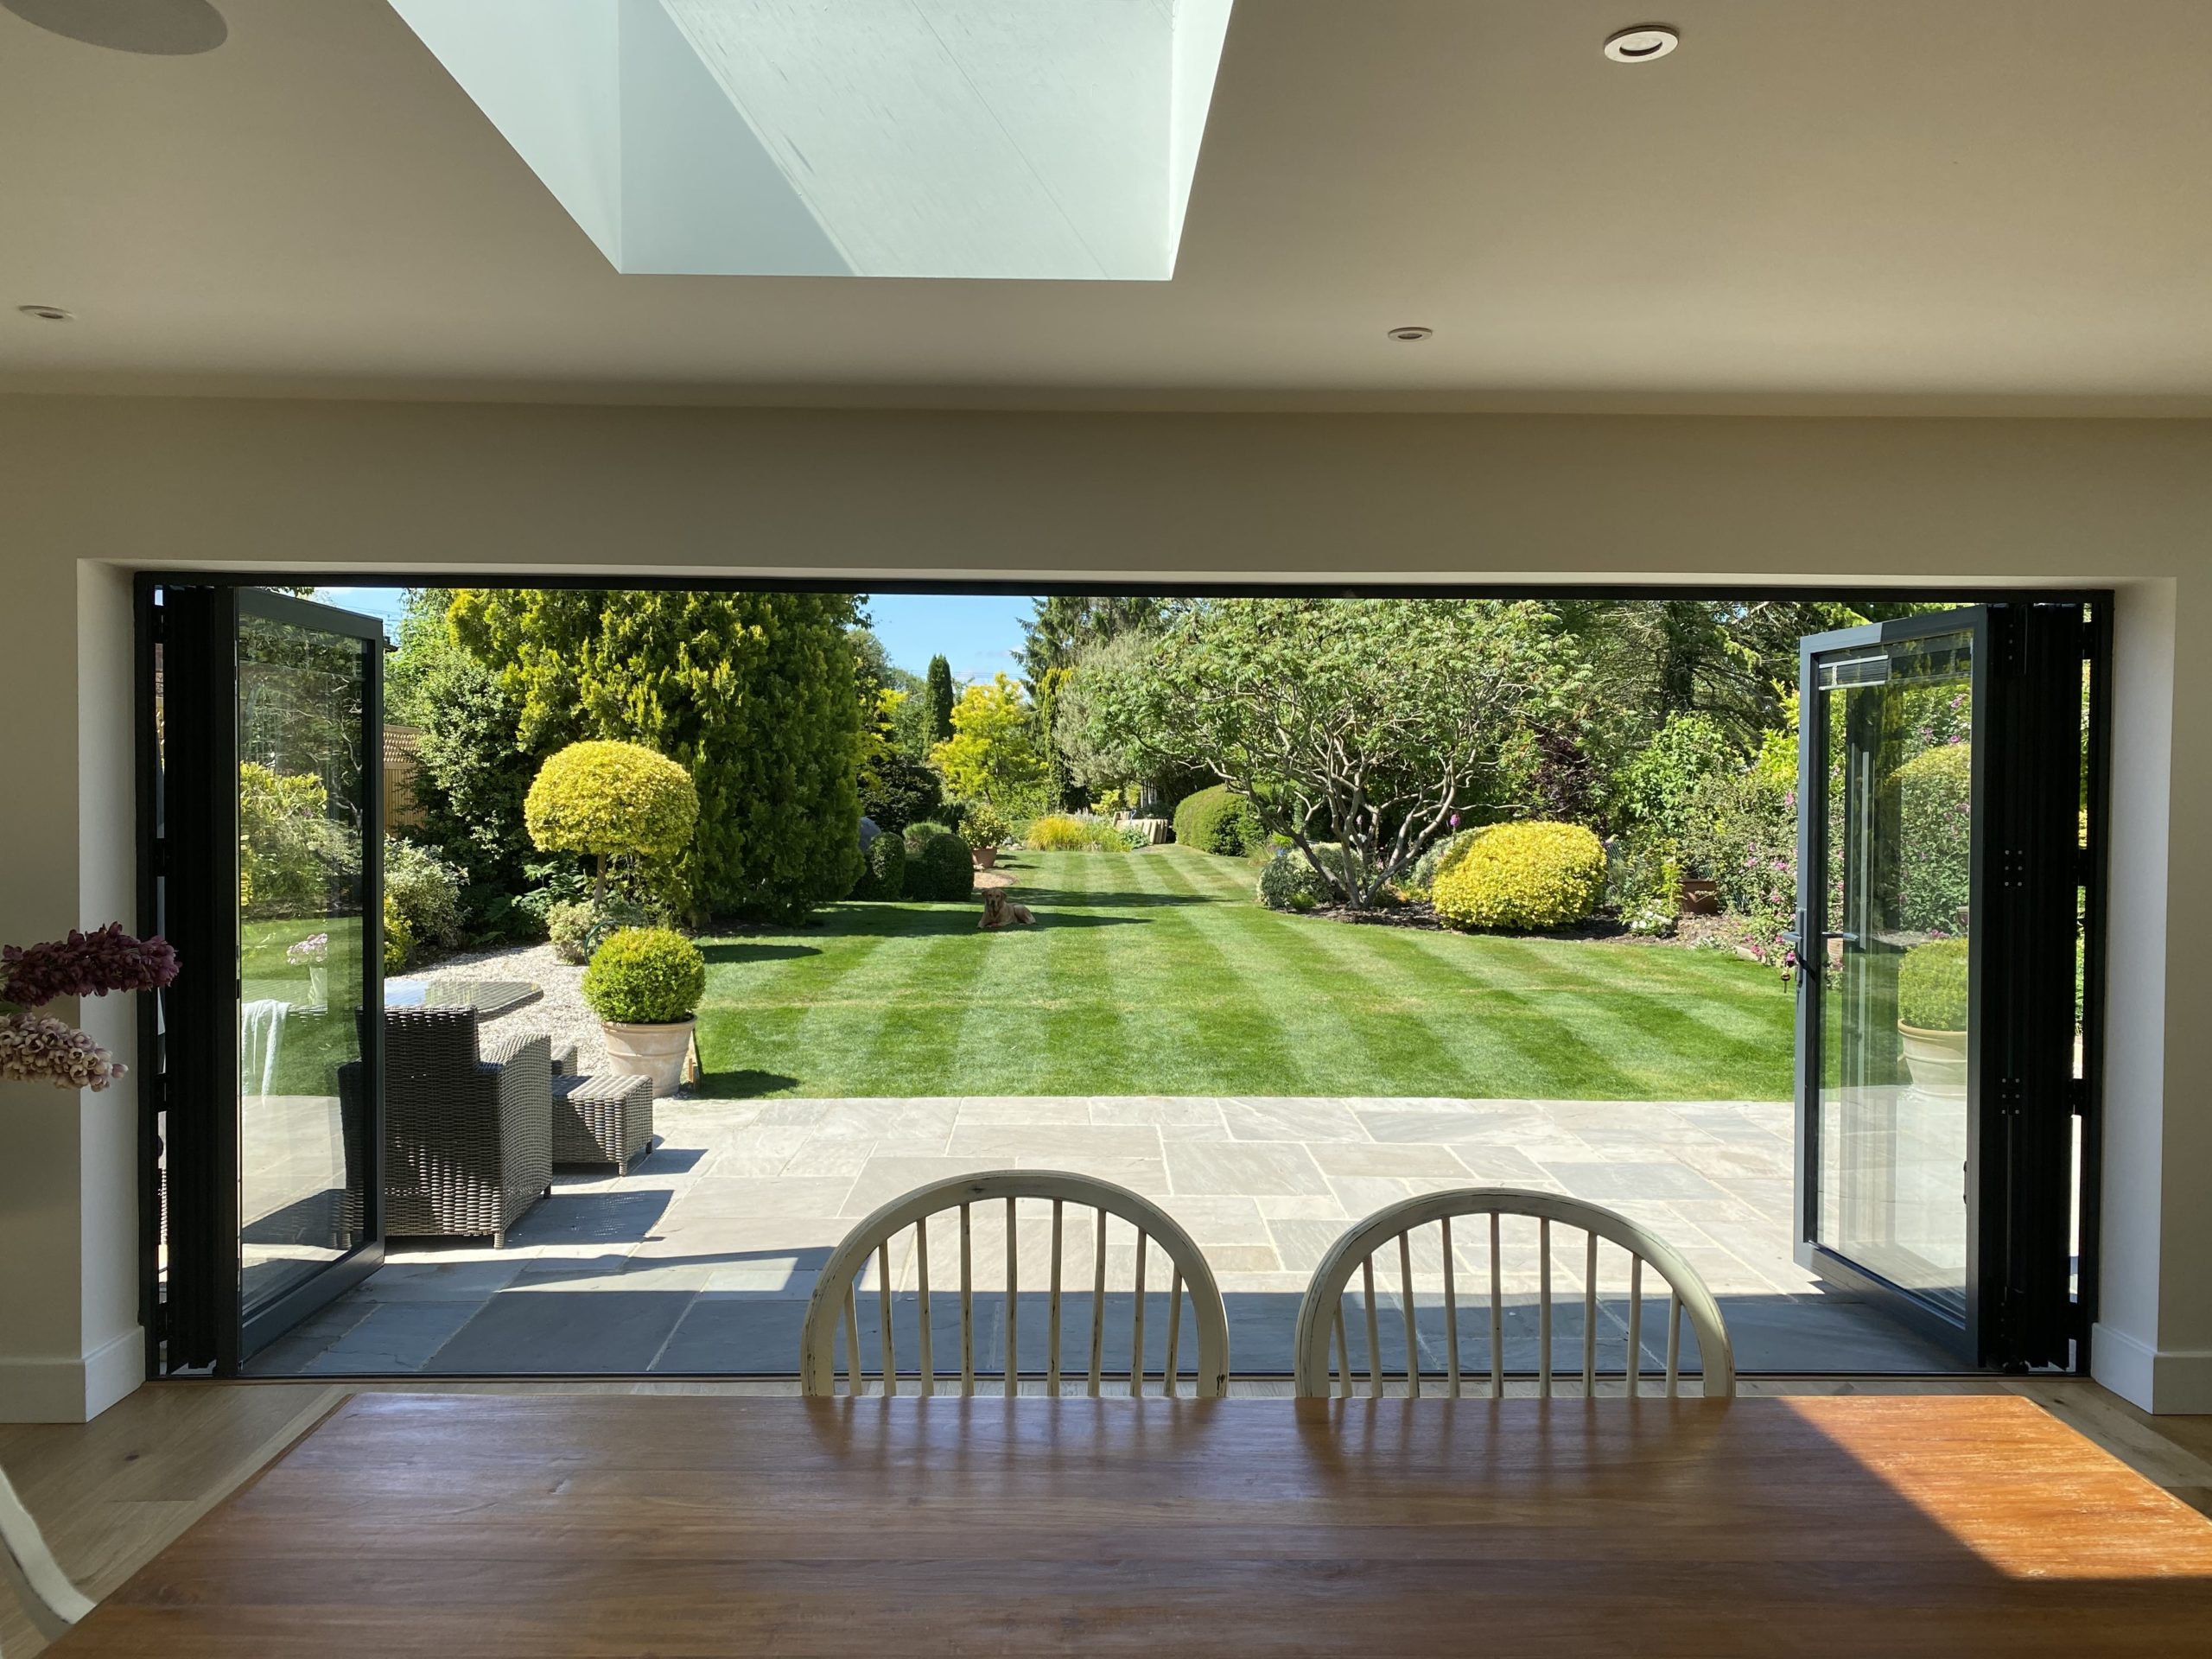 alutech bf73 bifold doors open over a lawn